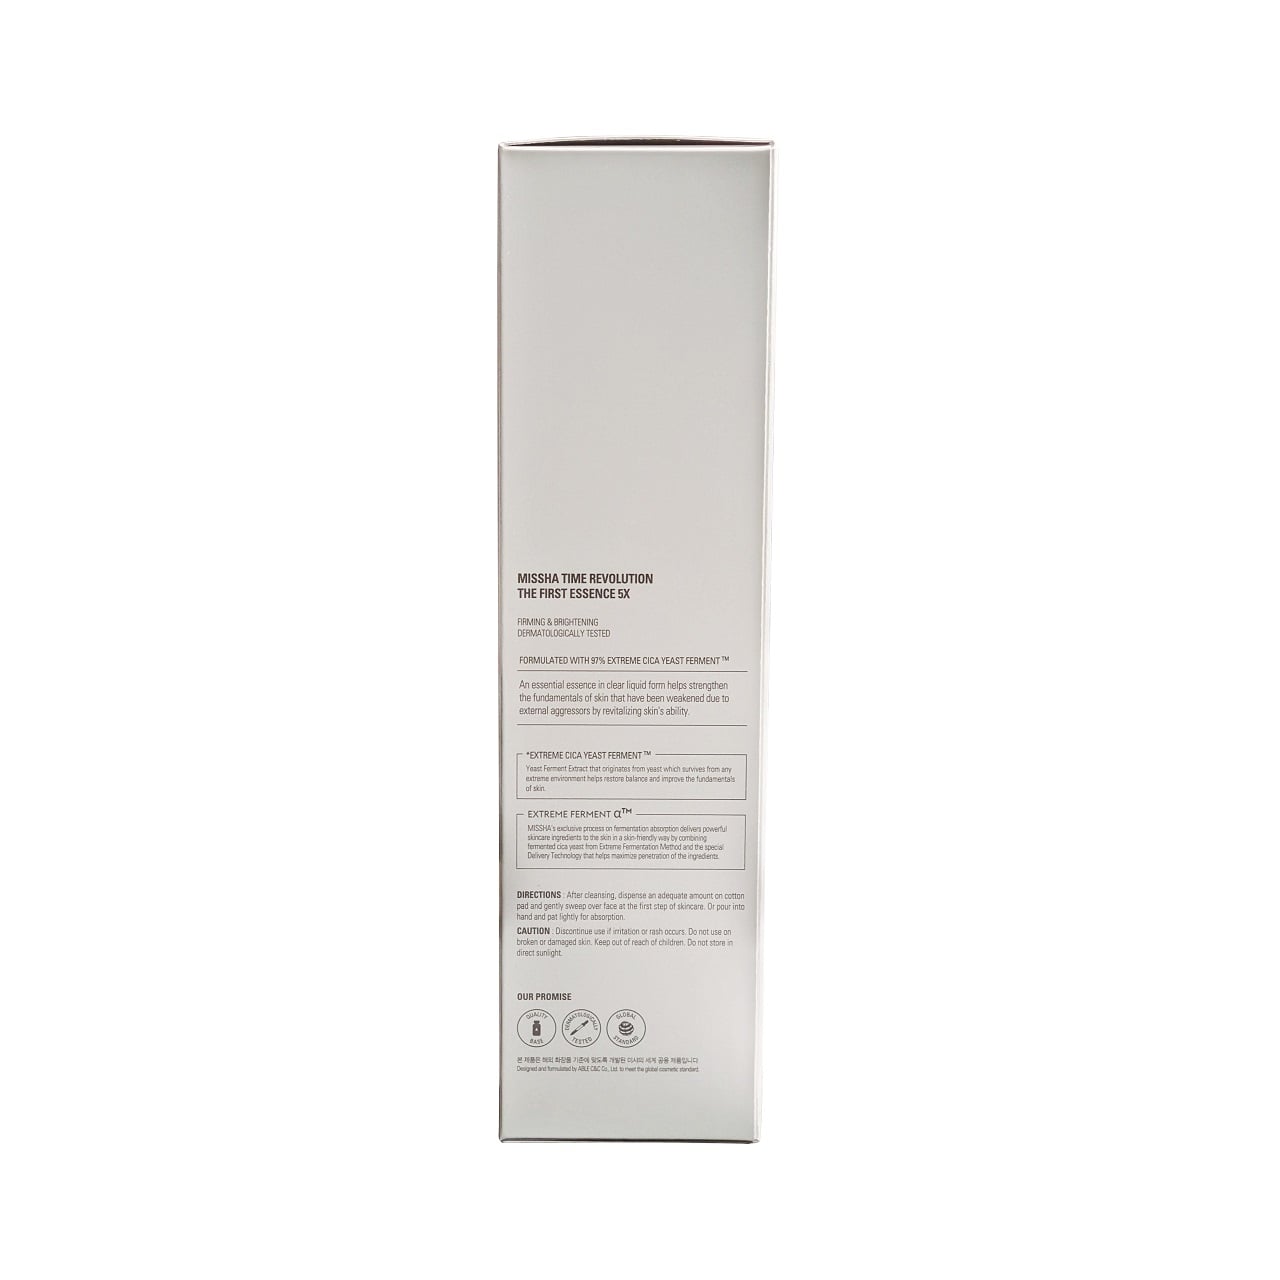 Description, directions, and caution for MISSHA Time Revolution The First Essence 5X (150 mL) in English